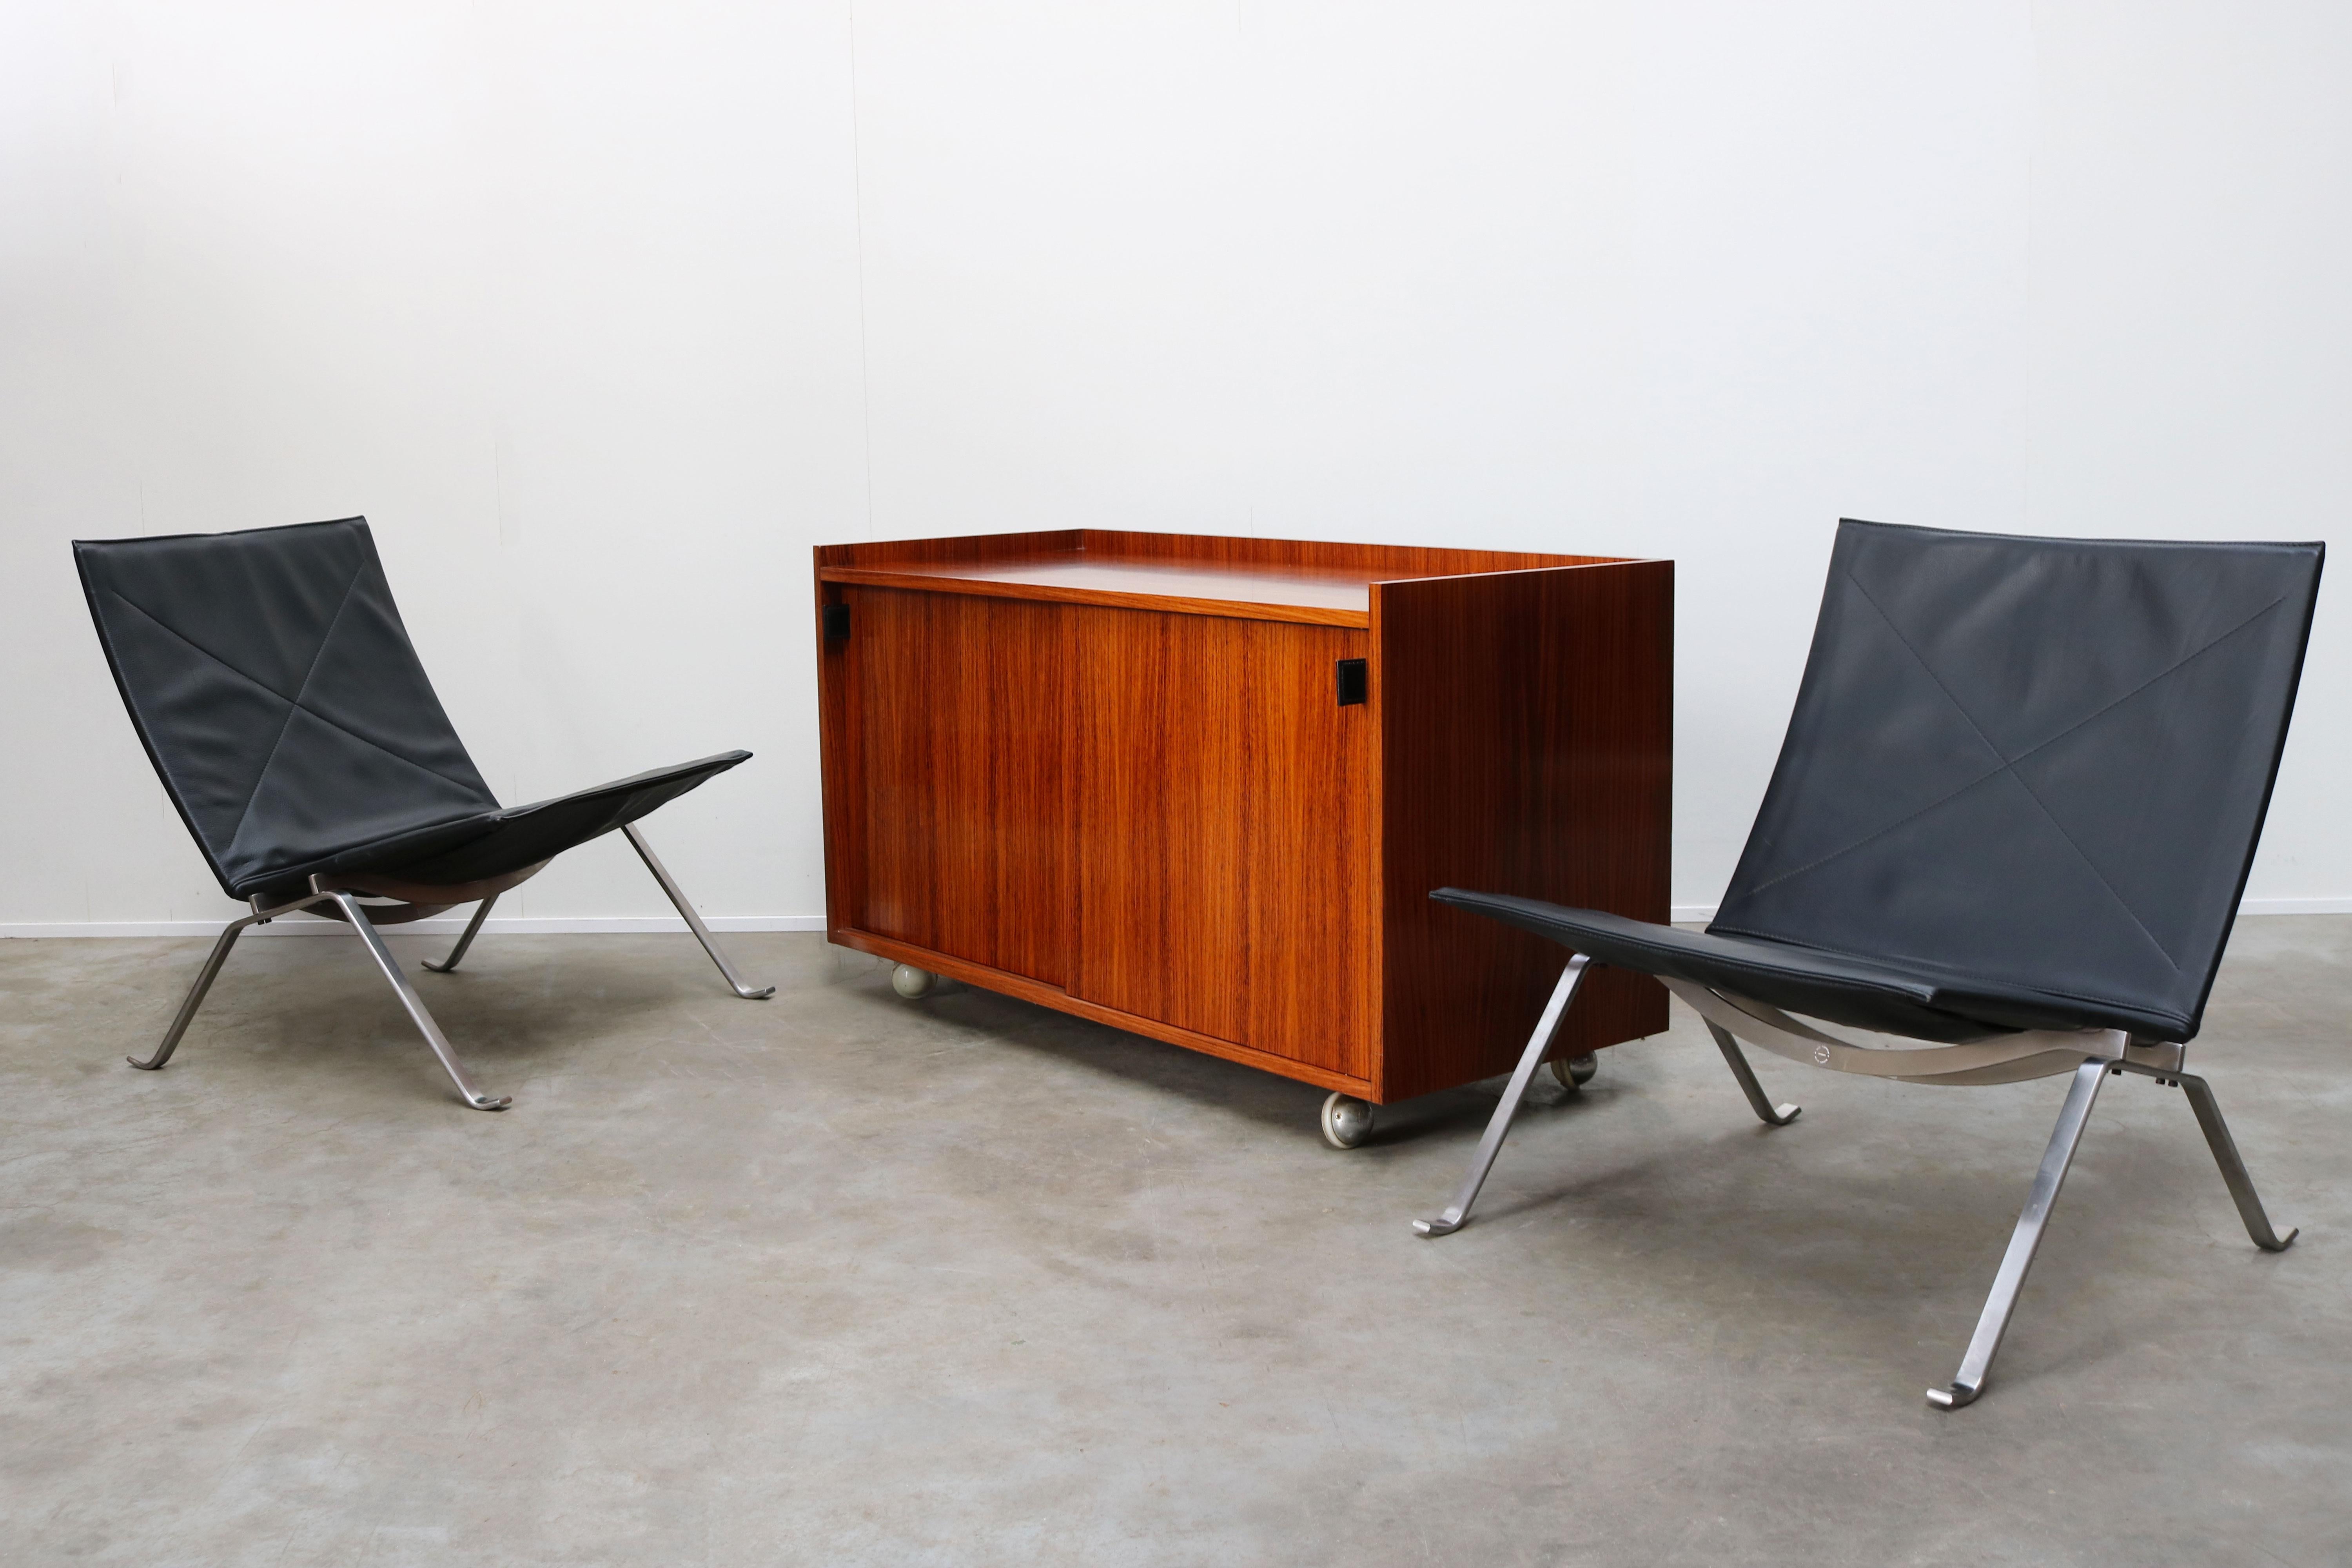 Vintage design credenza / sideboard in rosewood with leather grips designed by Florence Knoll for De Coene Belgium in the 1960s. Wonderful clean Minimalist modernist design in rosewood , the piece is covered in rosewood on all sides and can be used